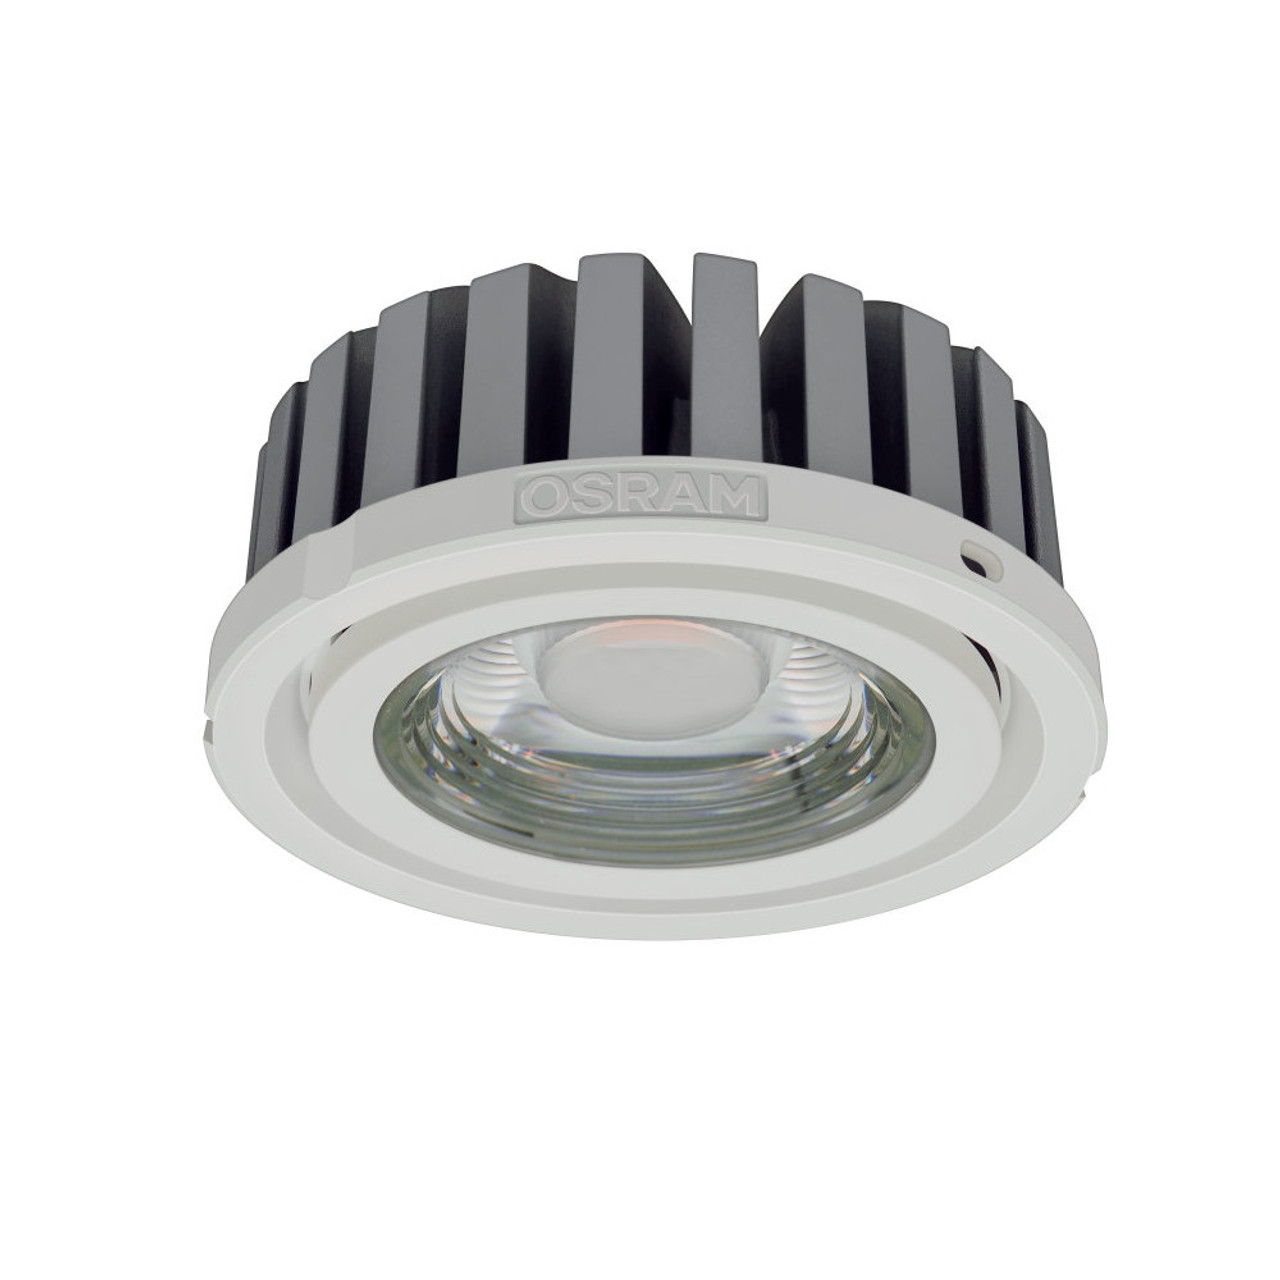 LED 1050mA Constant Current 36.7W Dimmable 940 4000K 3550lm 40 degrees COB